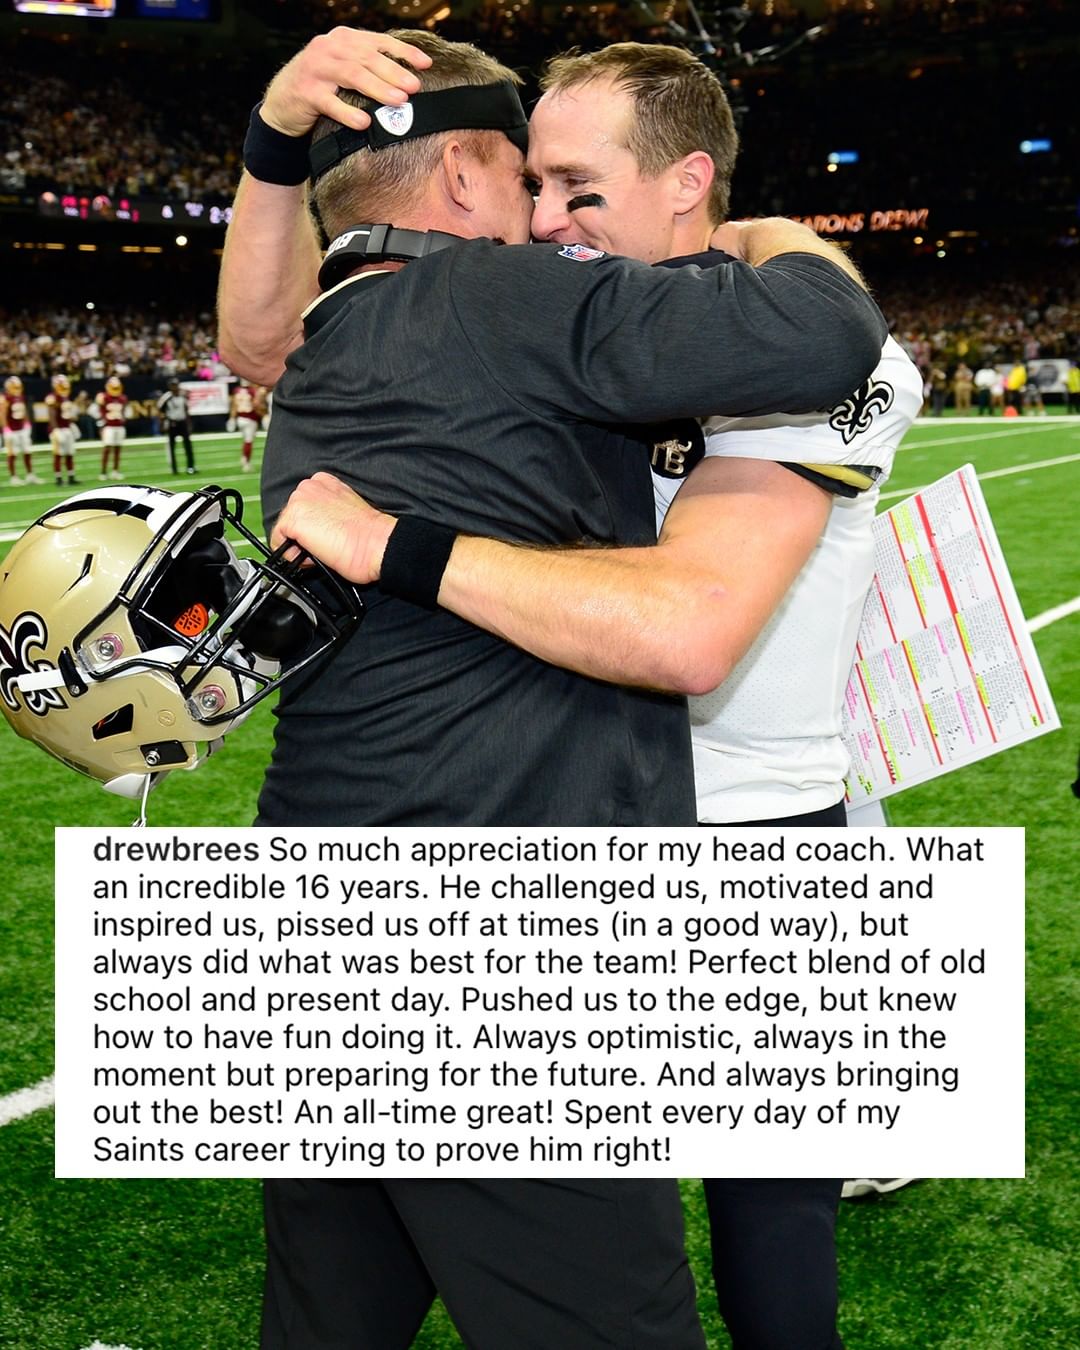 "Spent every day of my Saints career trying to prove him right!"  Brees' post on...